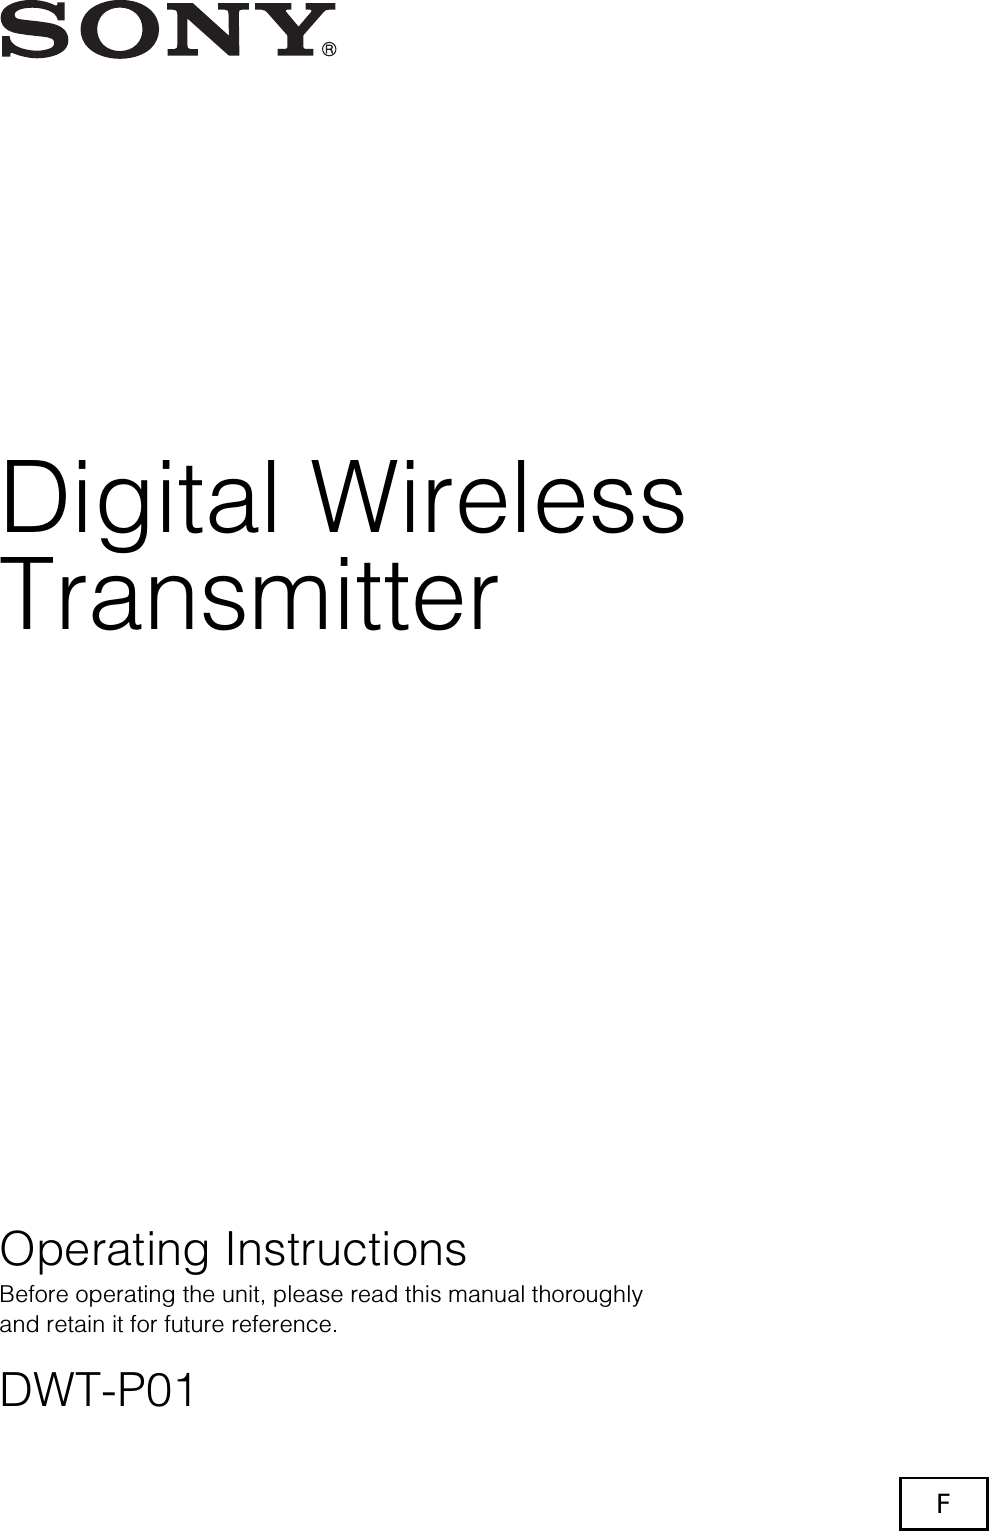 4-142-337-01 (1)© 2009 Sony CorporationDigital WirelessTransmitterOperating InstructionsBefore operating the unit, please read this manual thoroughly and retain it for future reference.DWT-P01F